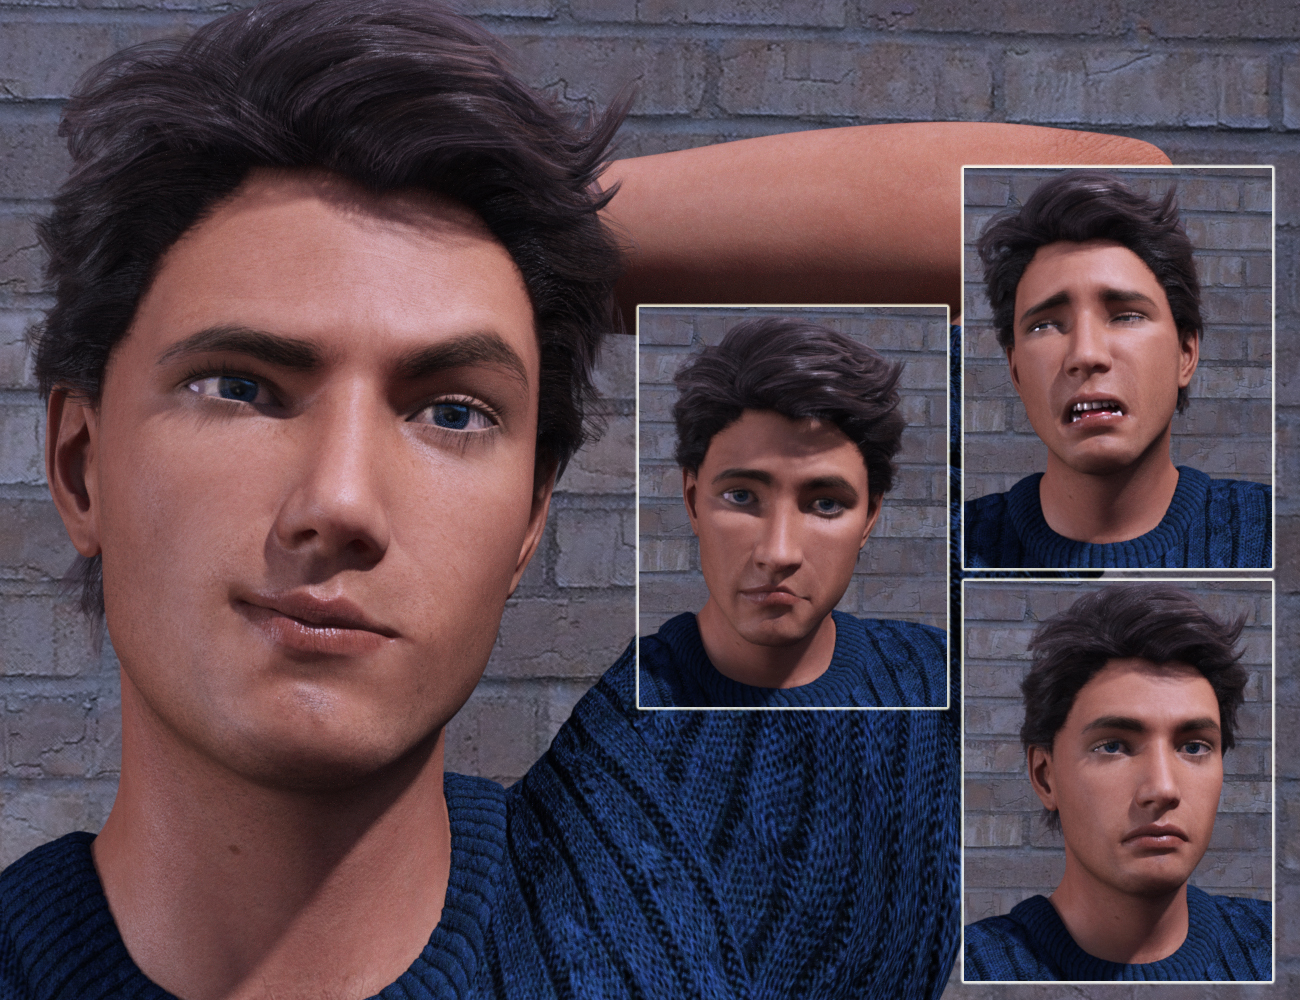 Big Drama Expressions for Genesis 3 Male(s) by: FeralFey, 3D Models by Daz 3D